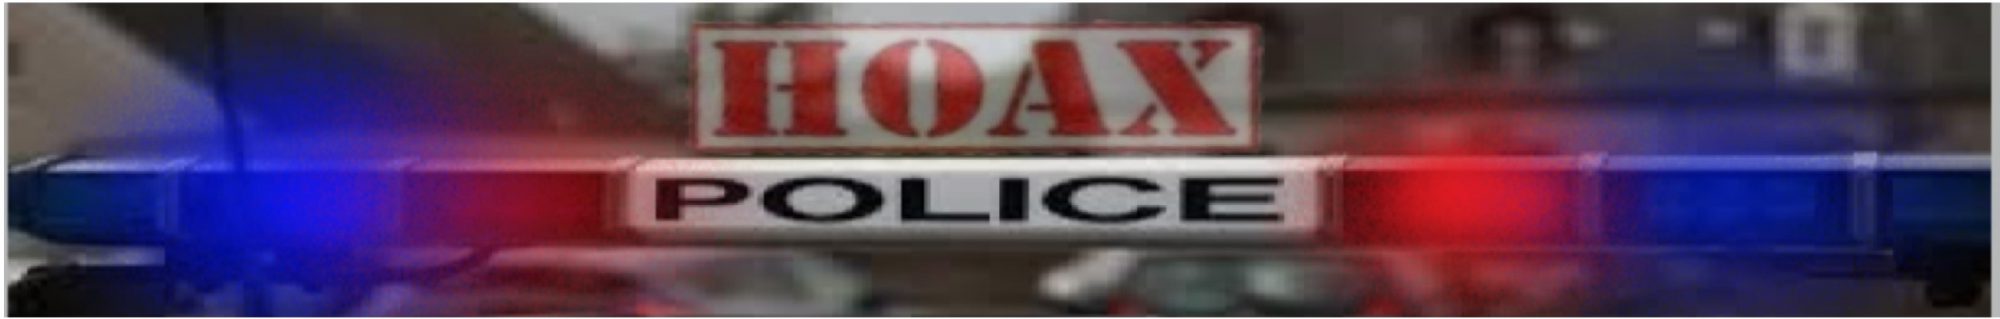 HoaxPolice Debunking Scams and Hoax – SCROLL DOWN AFTER SELECTION